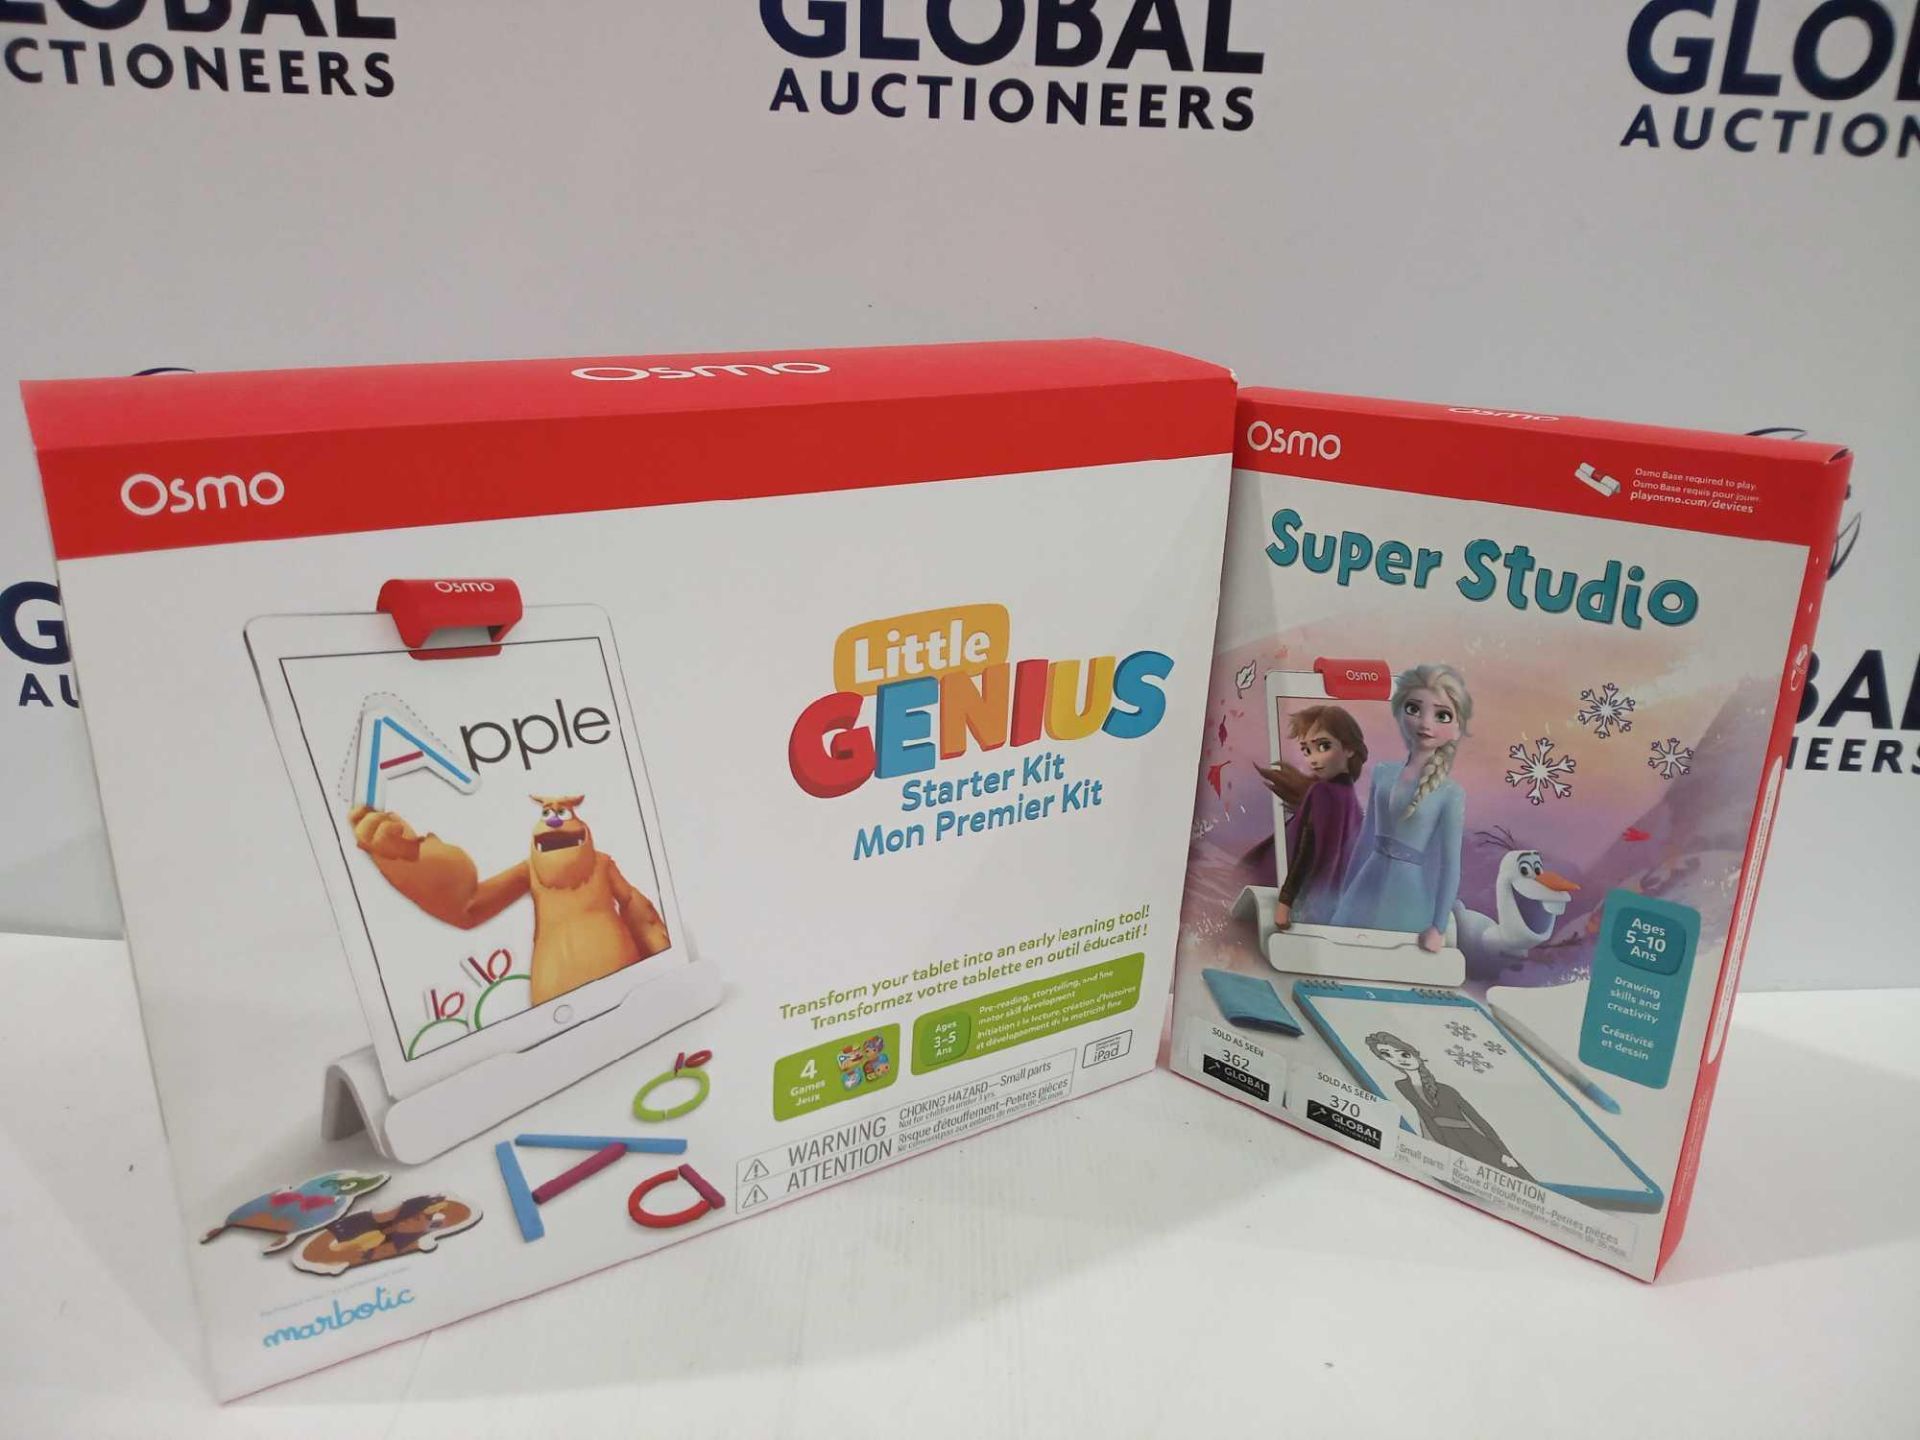 Rrp £130 Boxed Osmo Genius Starter Kit Complete Red Osmo Super Studio Disney Frozen Ii Age Is 5 To 1 - Image 2 of 2